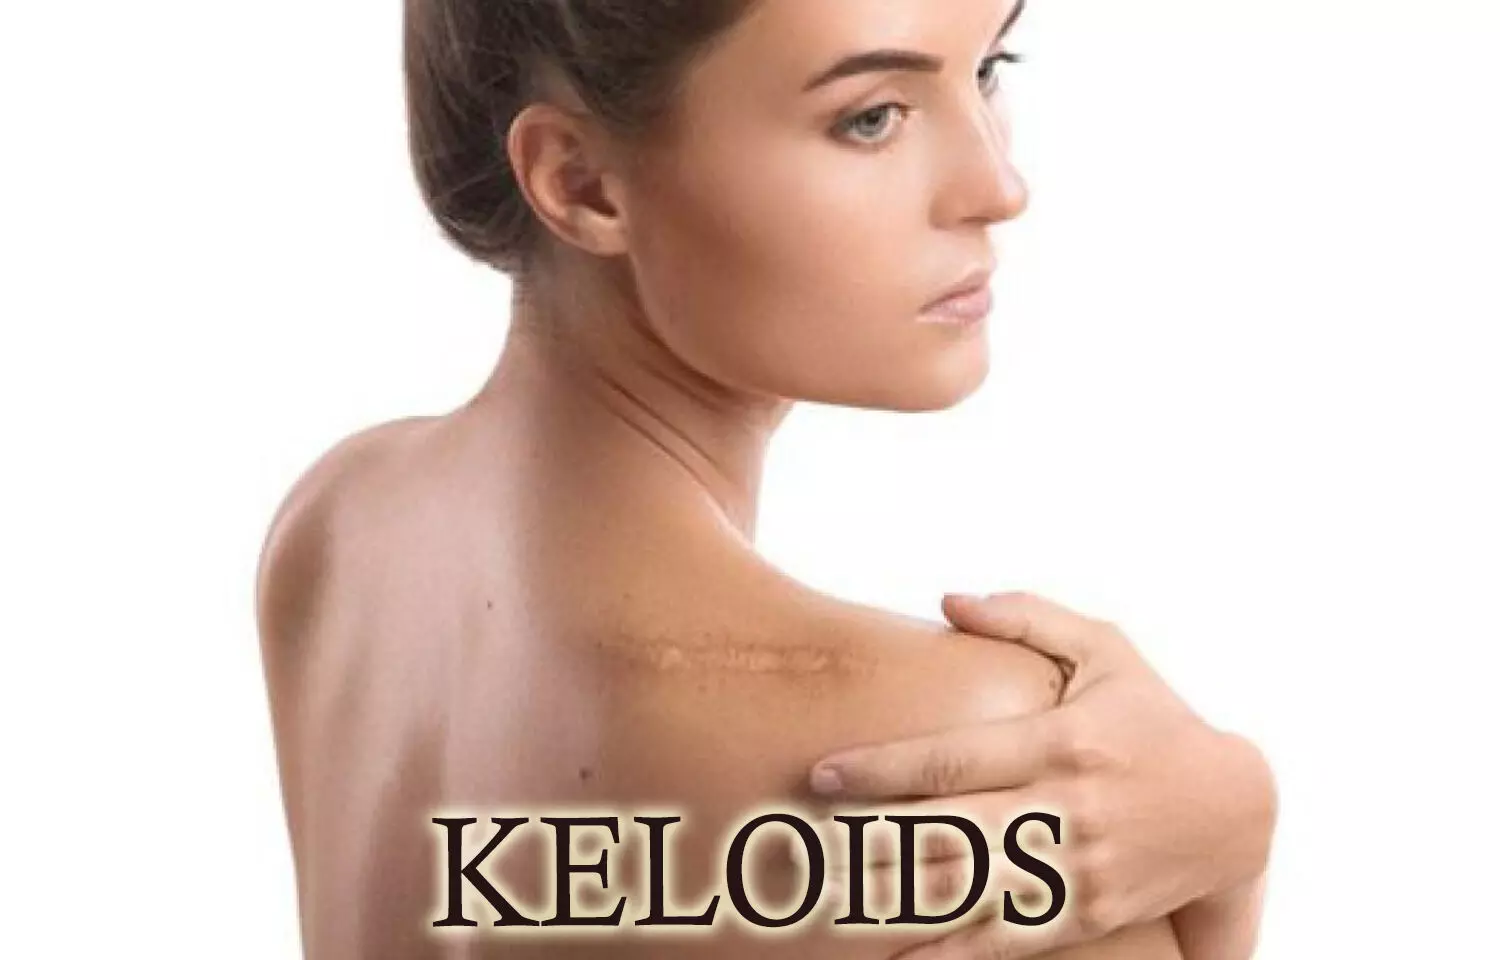 Novel therapies for keloids - a review